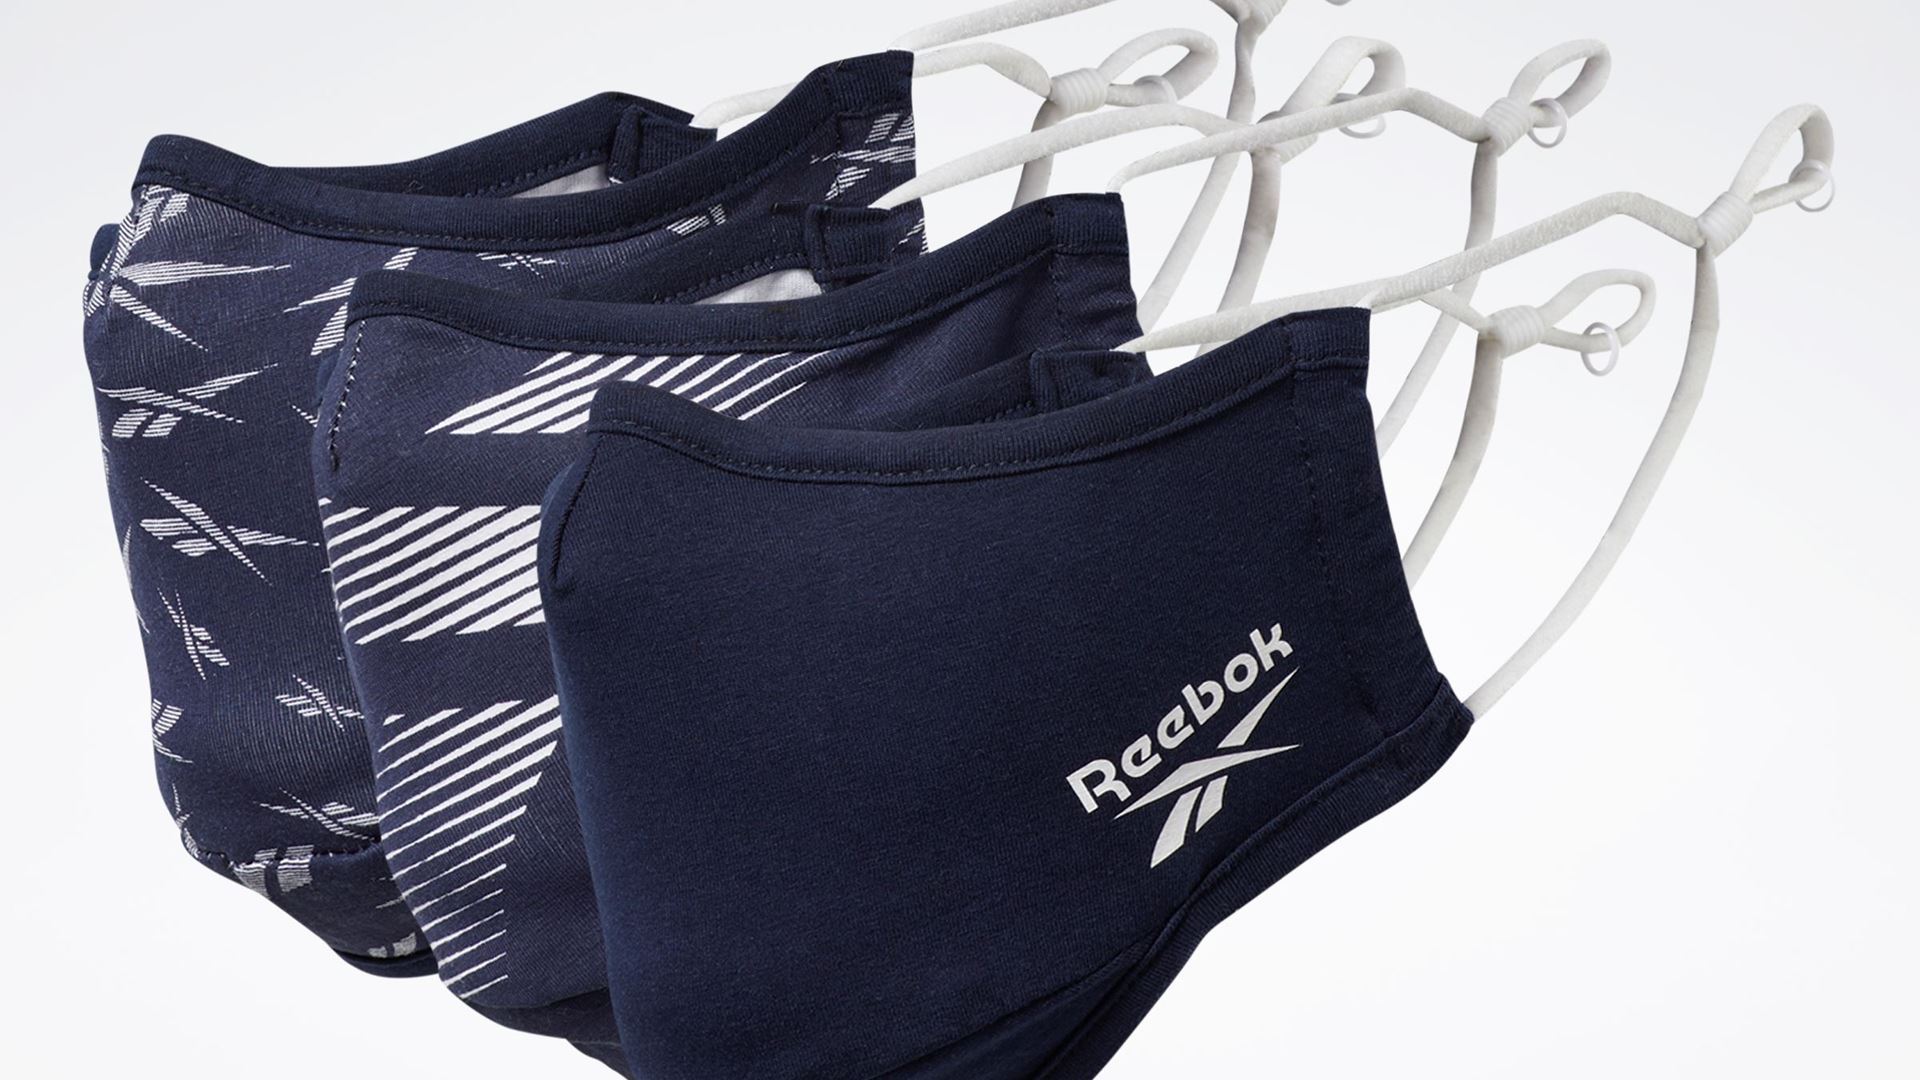 Reebok Face Covers